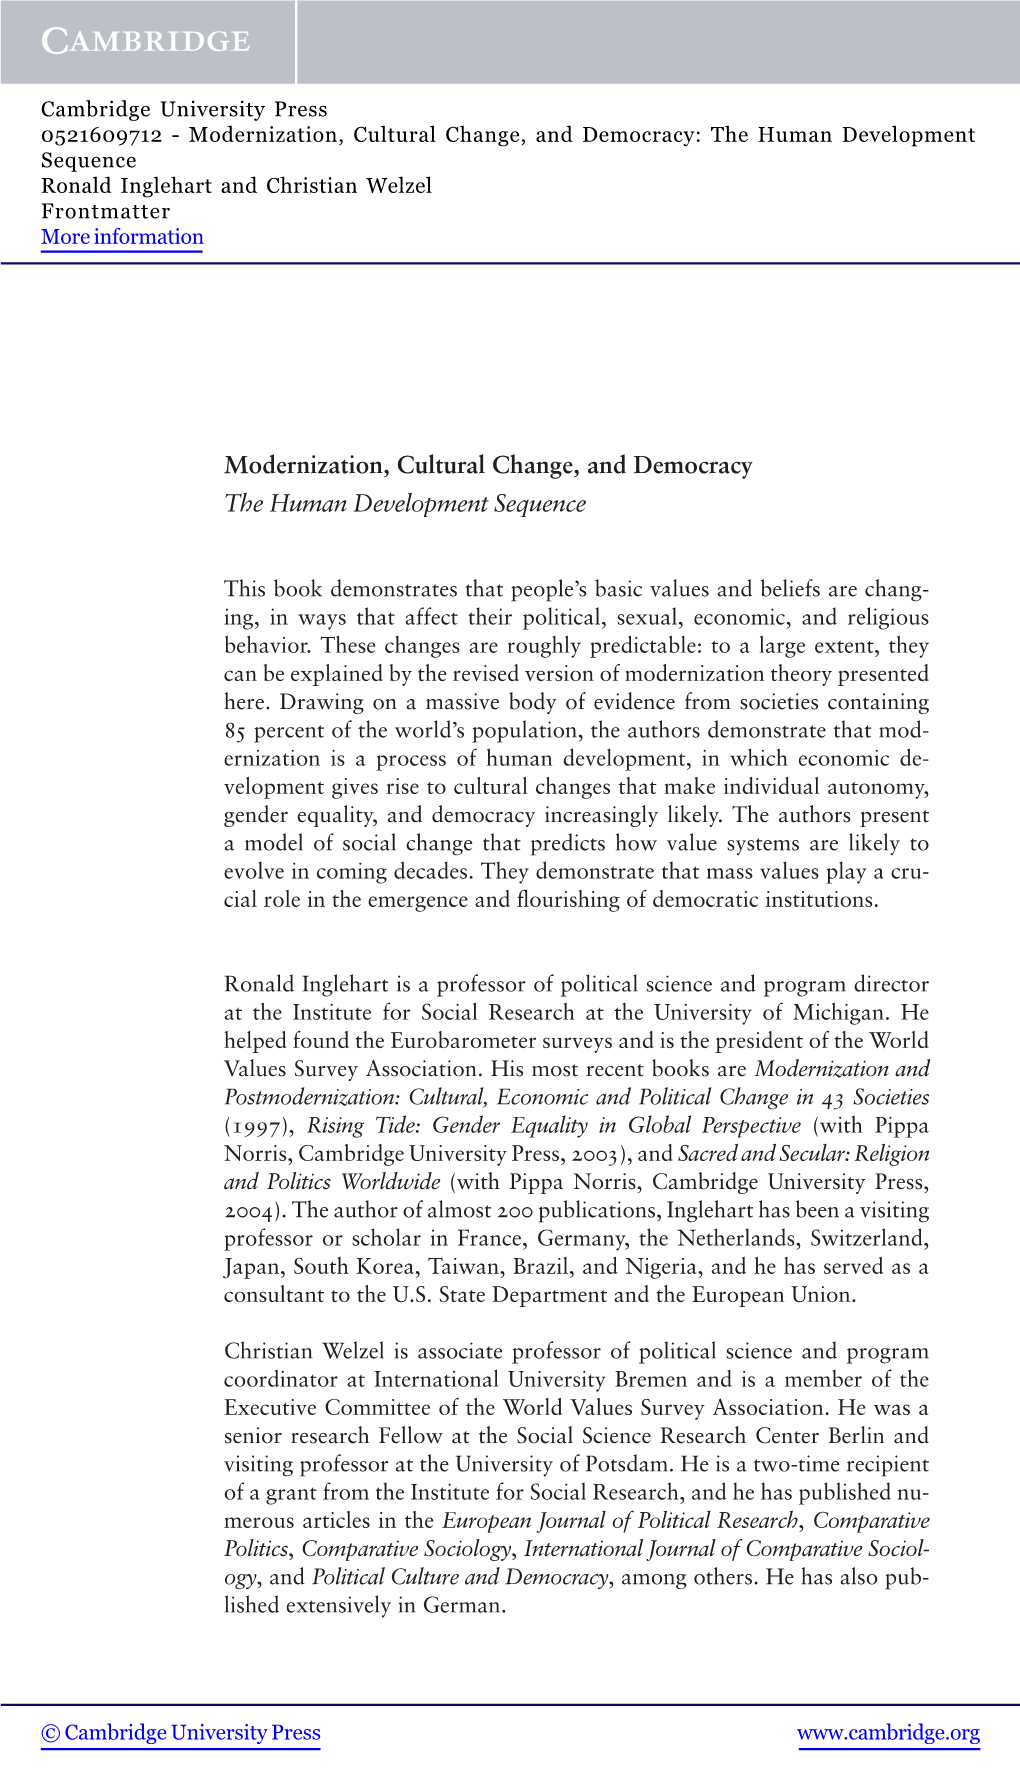 Modernization, Cultural Change, and Democracy the Human Development Sequence